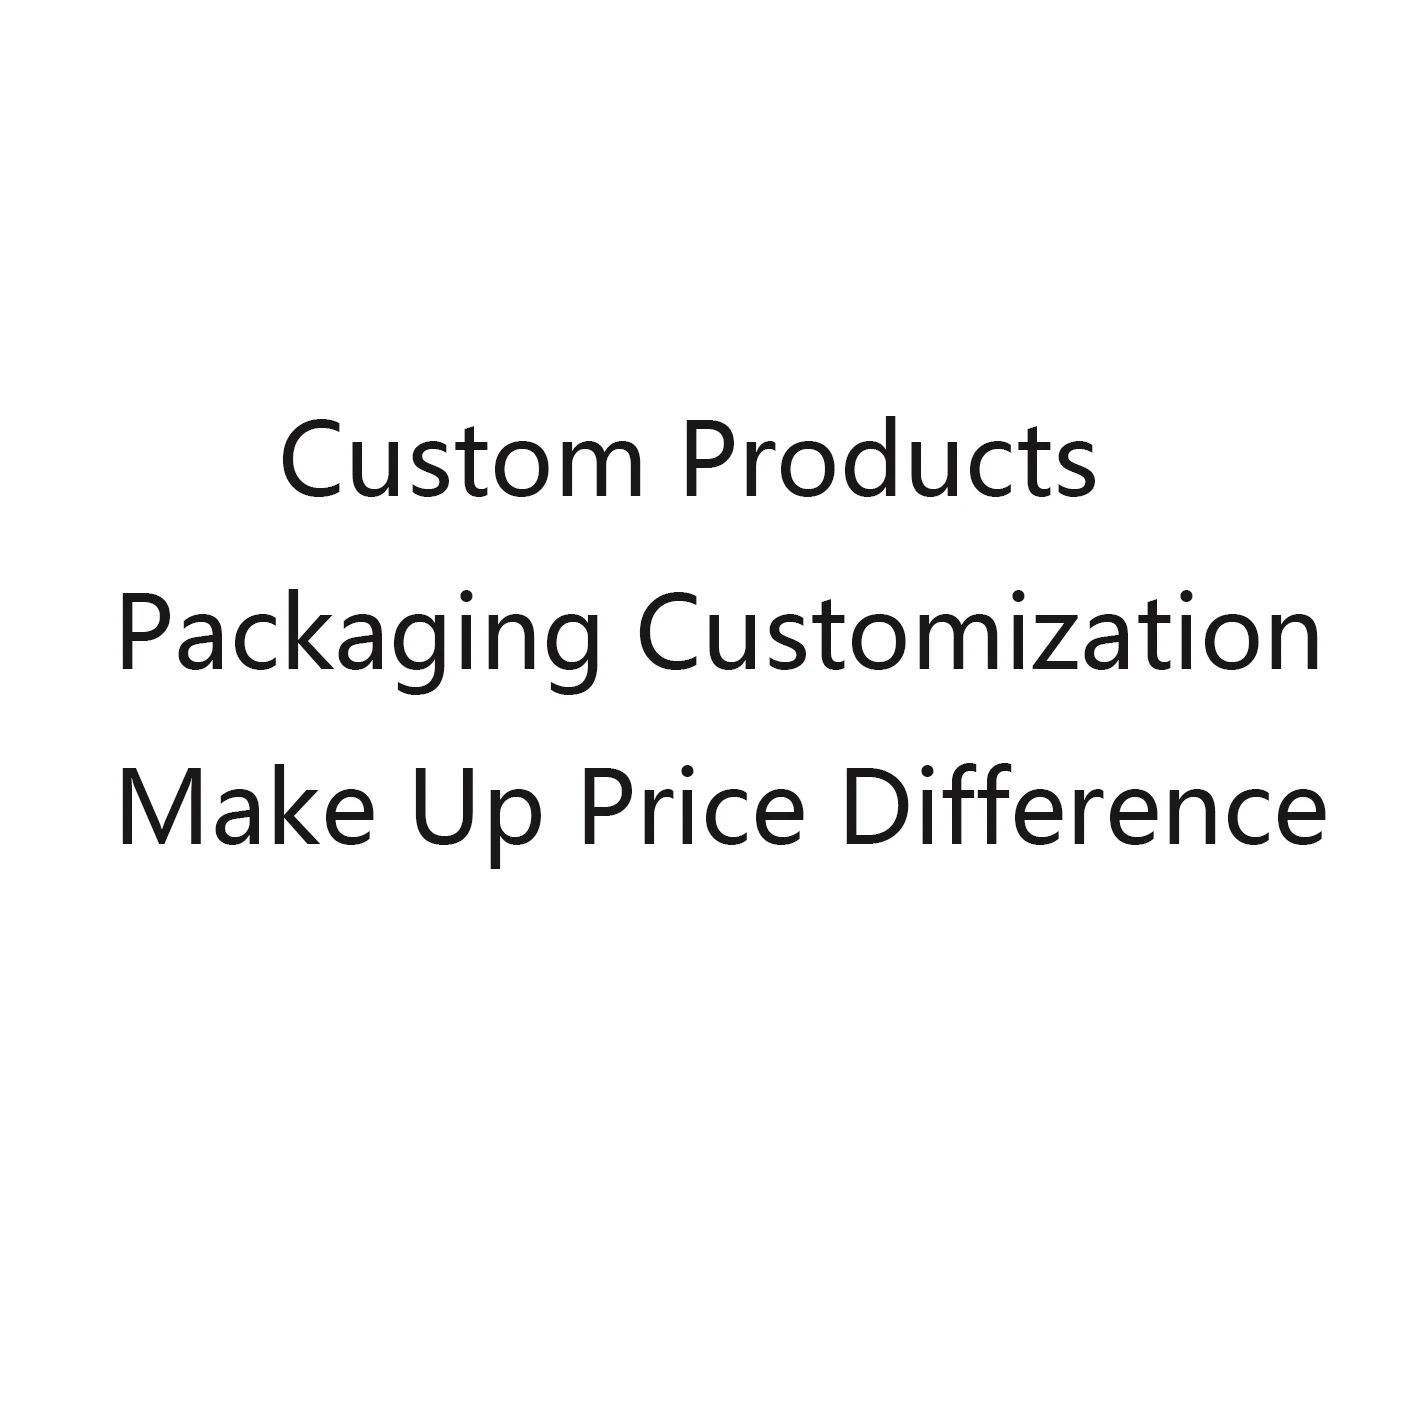 

Customized Products Packaging Customization Welcome Drawings Or Pictures Make Up Freight Make Up Price Difference